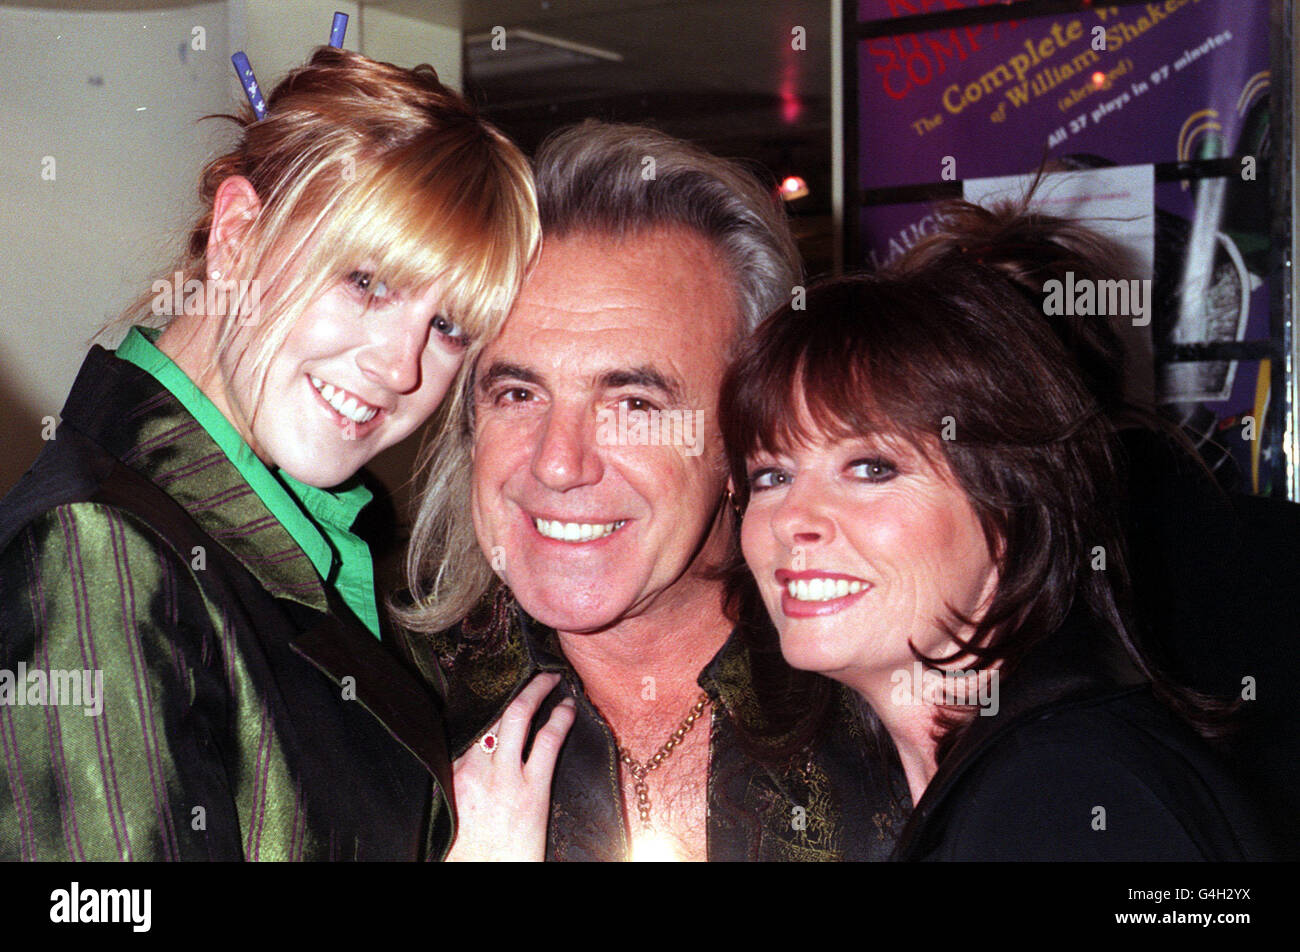 PA NEWS 30/11/98 NIGHTCLUB OWNER PETER STRINGFELLOW WITH ACTRESS VICKY MICHELLE (RIGHT) DURING A WILLIAM HUNT WINTER COLLECTION FASHION SHOW AT THE CRITERION THEATRE IN LONDON. Stock Photo